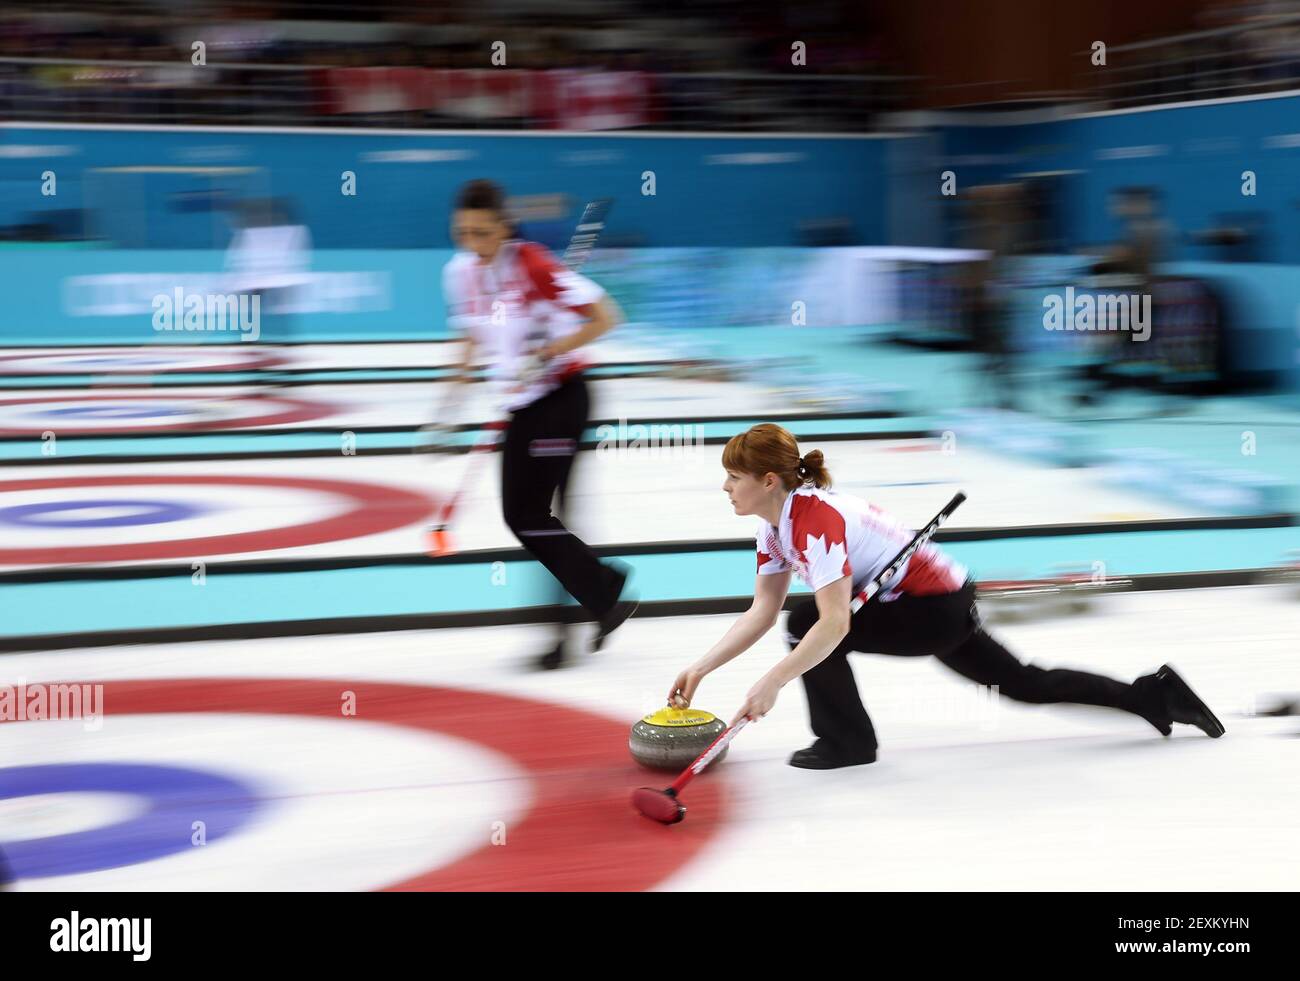 Canada's Dawn McEwen throws during her team's victory over Great Britain in the women's curling semifinals at the Ice Cube Curling Center during the Winter Olympics in Sochi, Russia, Wednesday, Feb. 19, 2014. (Photo by Brian Cassella/Chicago Tribune/MCT/Sipa USA) Stock Photo